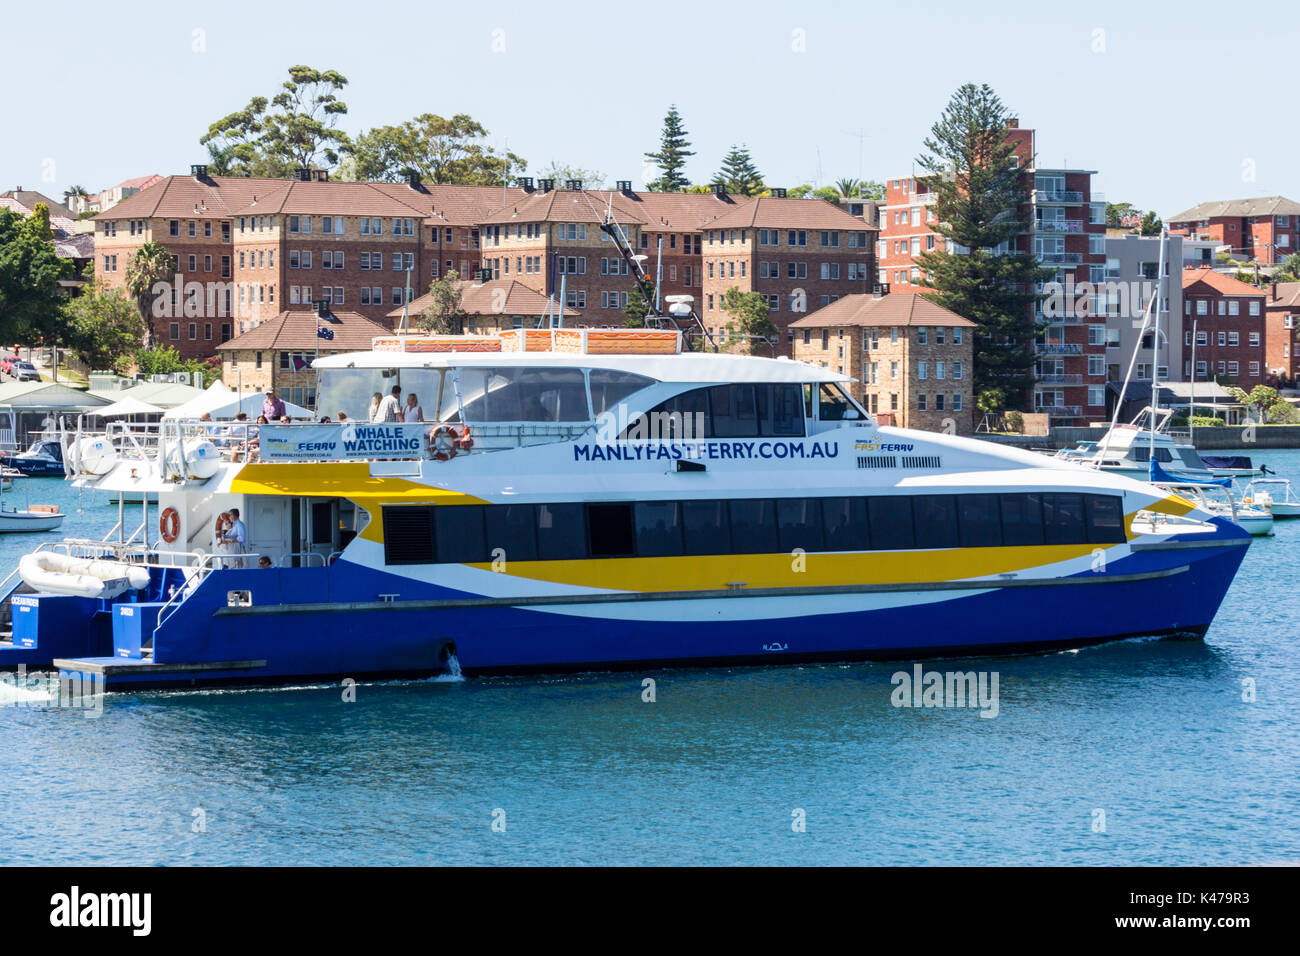 The Manly fast ferry leaving Manly for Circular Quay, Sydney, NSW,New South Wales, Australiacatamaram Stock Photo